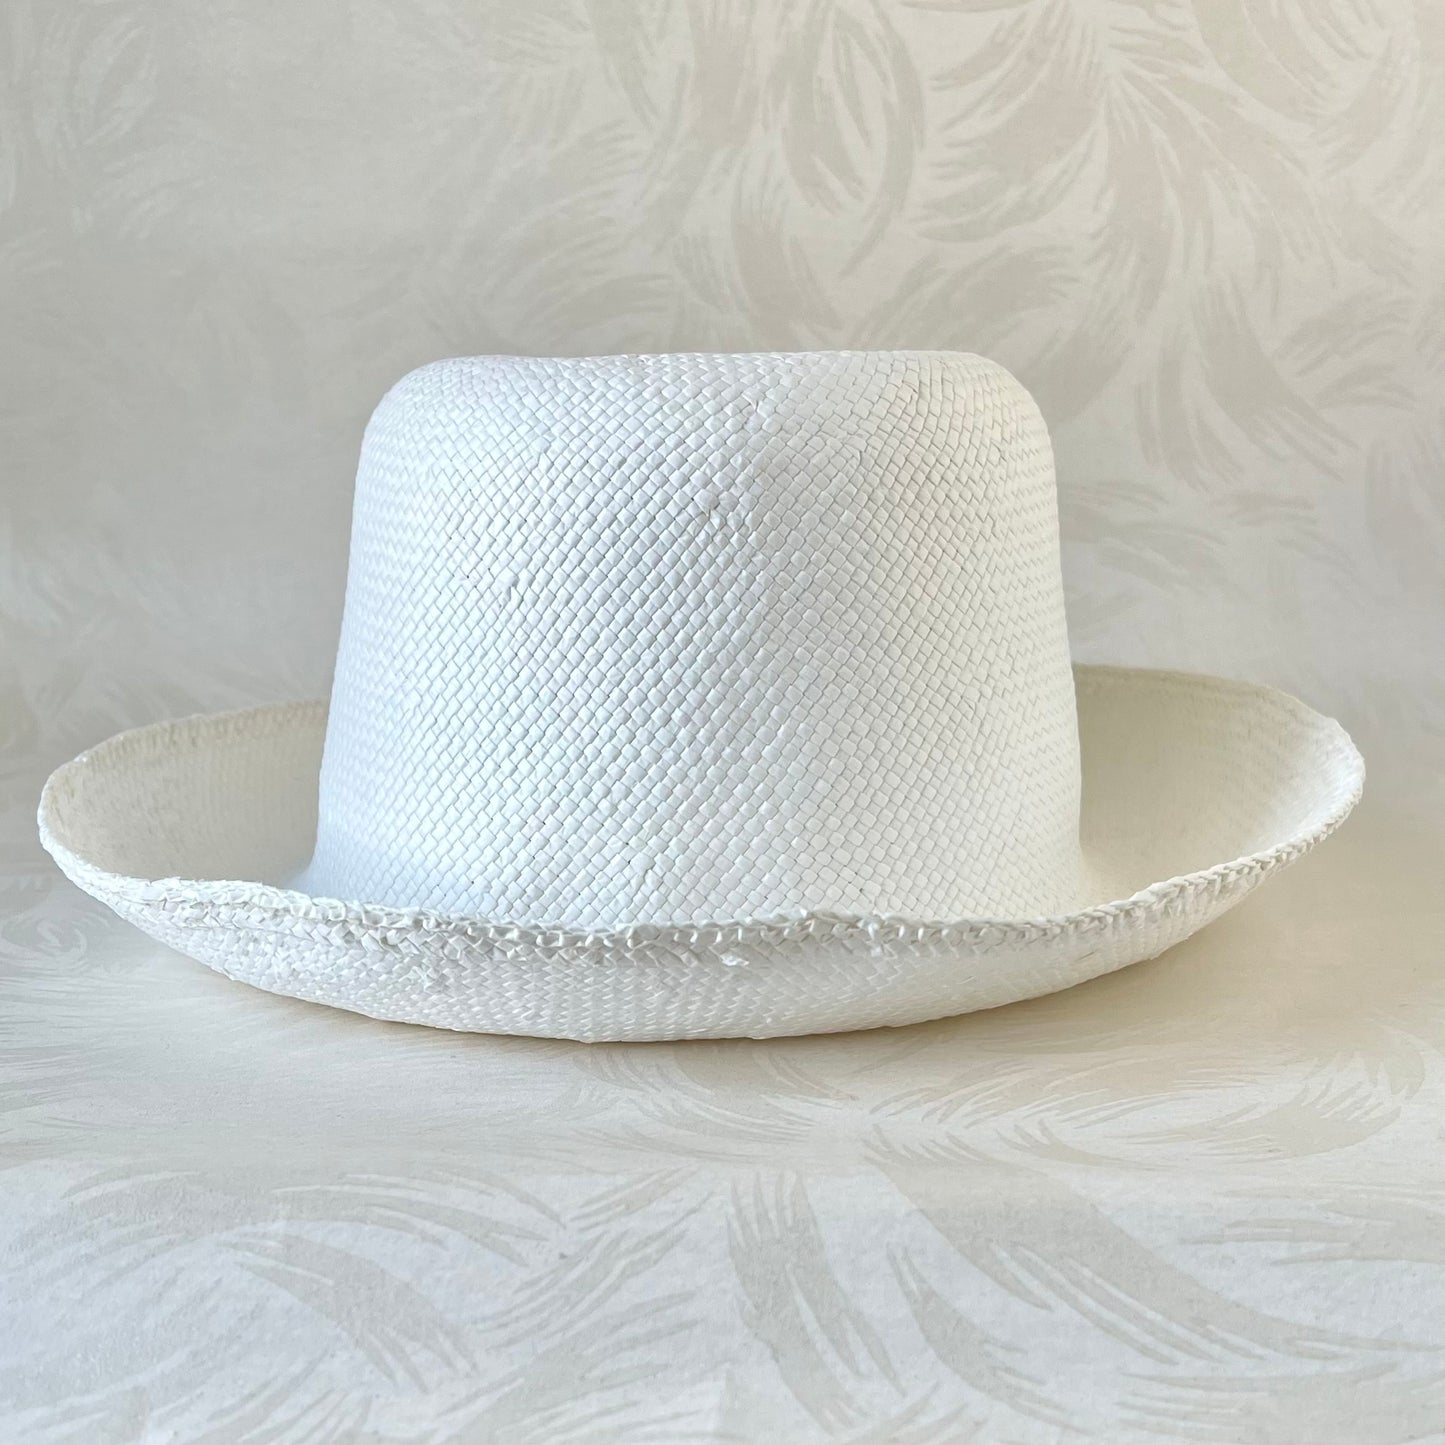 Woven Paper Hat Body - Child